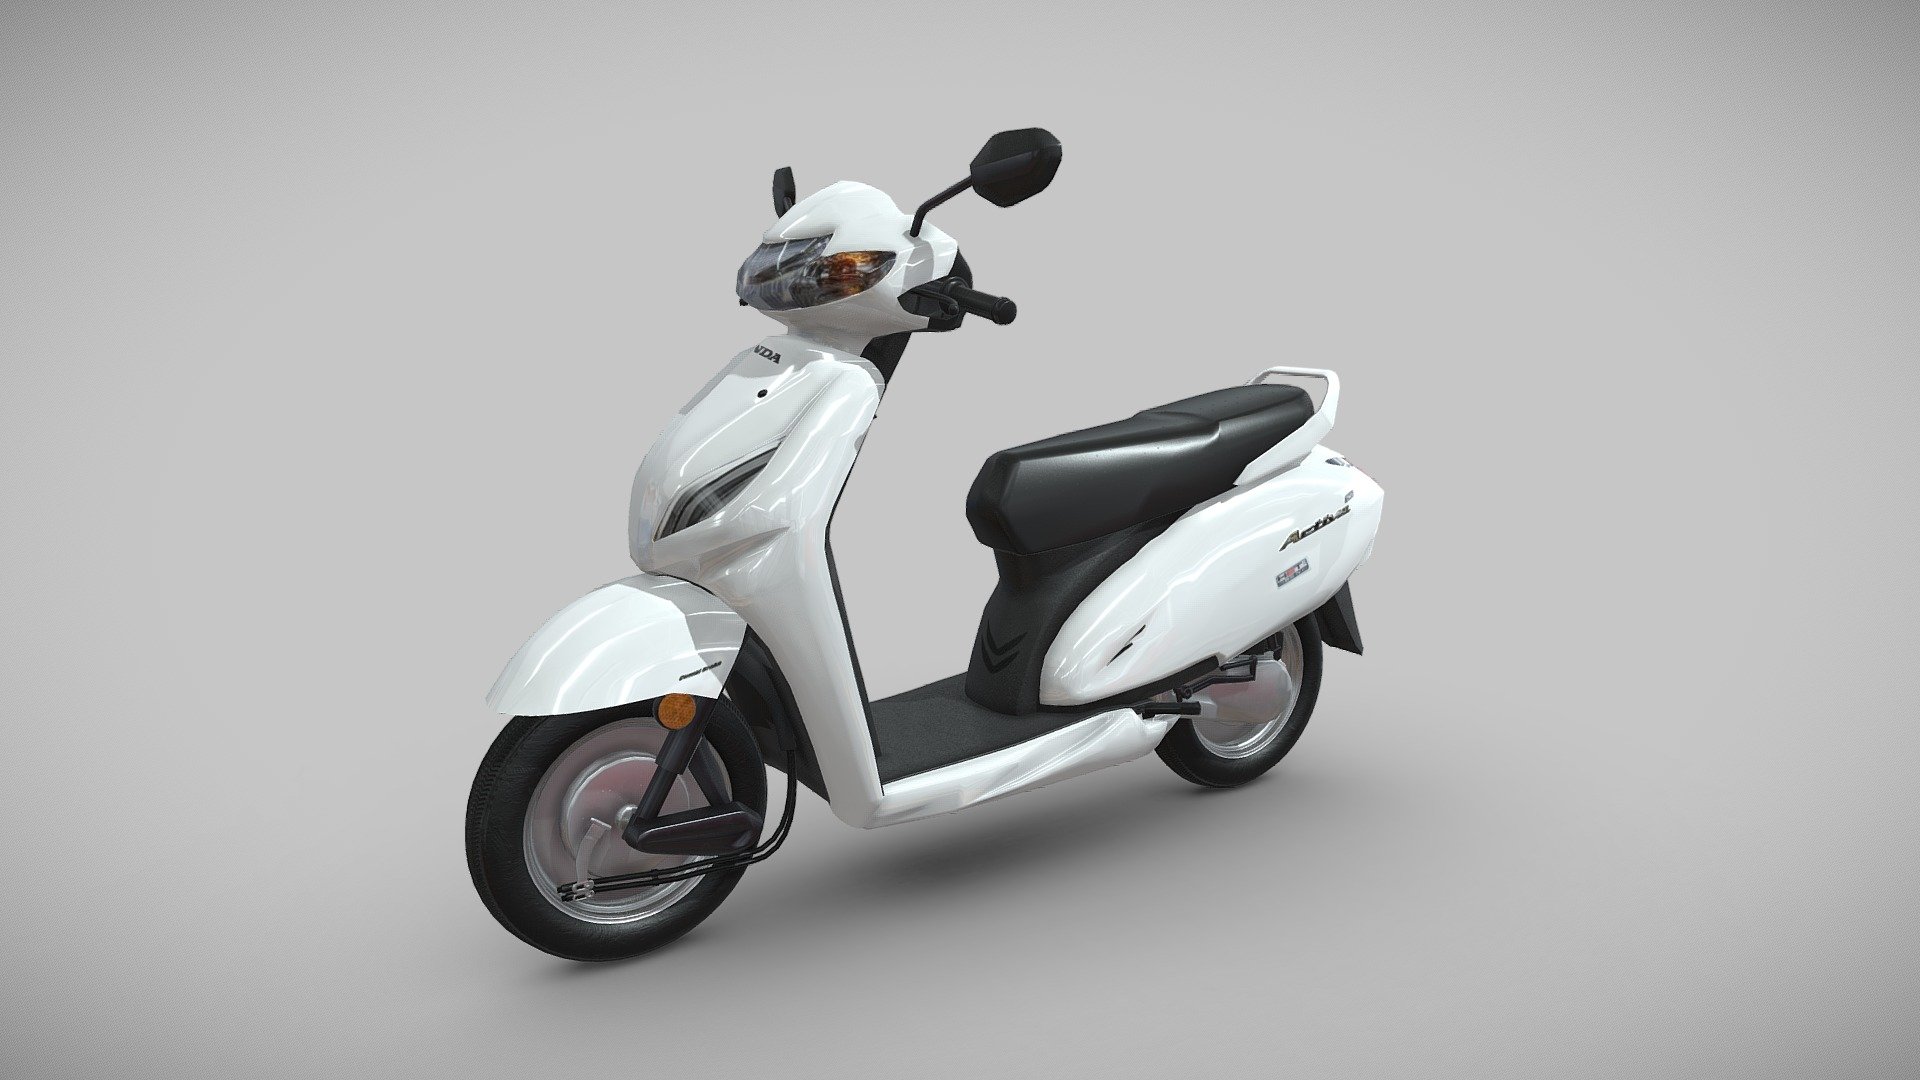 This is Honda Activa Scooter 3d Model.

The model was created in Maya 2018, rendered with Substance painter, Clean topology based on quads. Detailed High quality model.

All Materials in this pack are provide with all named.

Model Type: Polygonal
Polygons: 12,906
Vertices: 13,737
Formats available: Maya ASCII 2018, Maya Binary 2018, FBX , OBJ
Textures: Color, Normal, Height, Metallic, Roughness and Opacity maps
Texture Resolution: 4096 x 4096 pixels

If the price is not suitable for you can contact me and discuss the price.

Please don't forget to rate the model.

Hope you like it!

Thank You 3d model